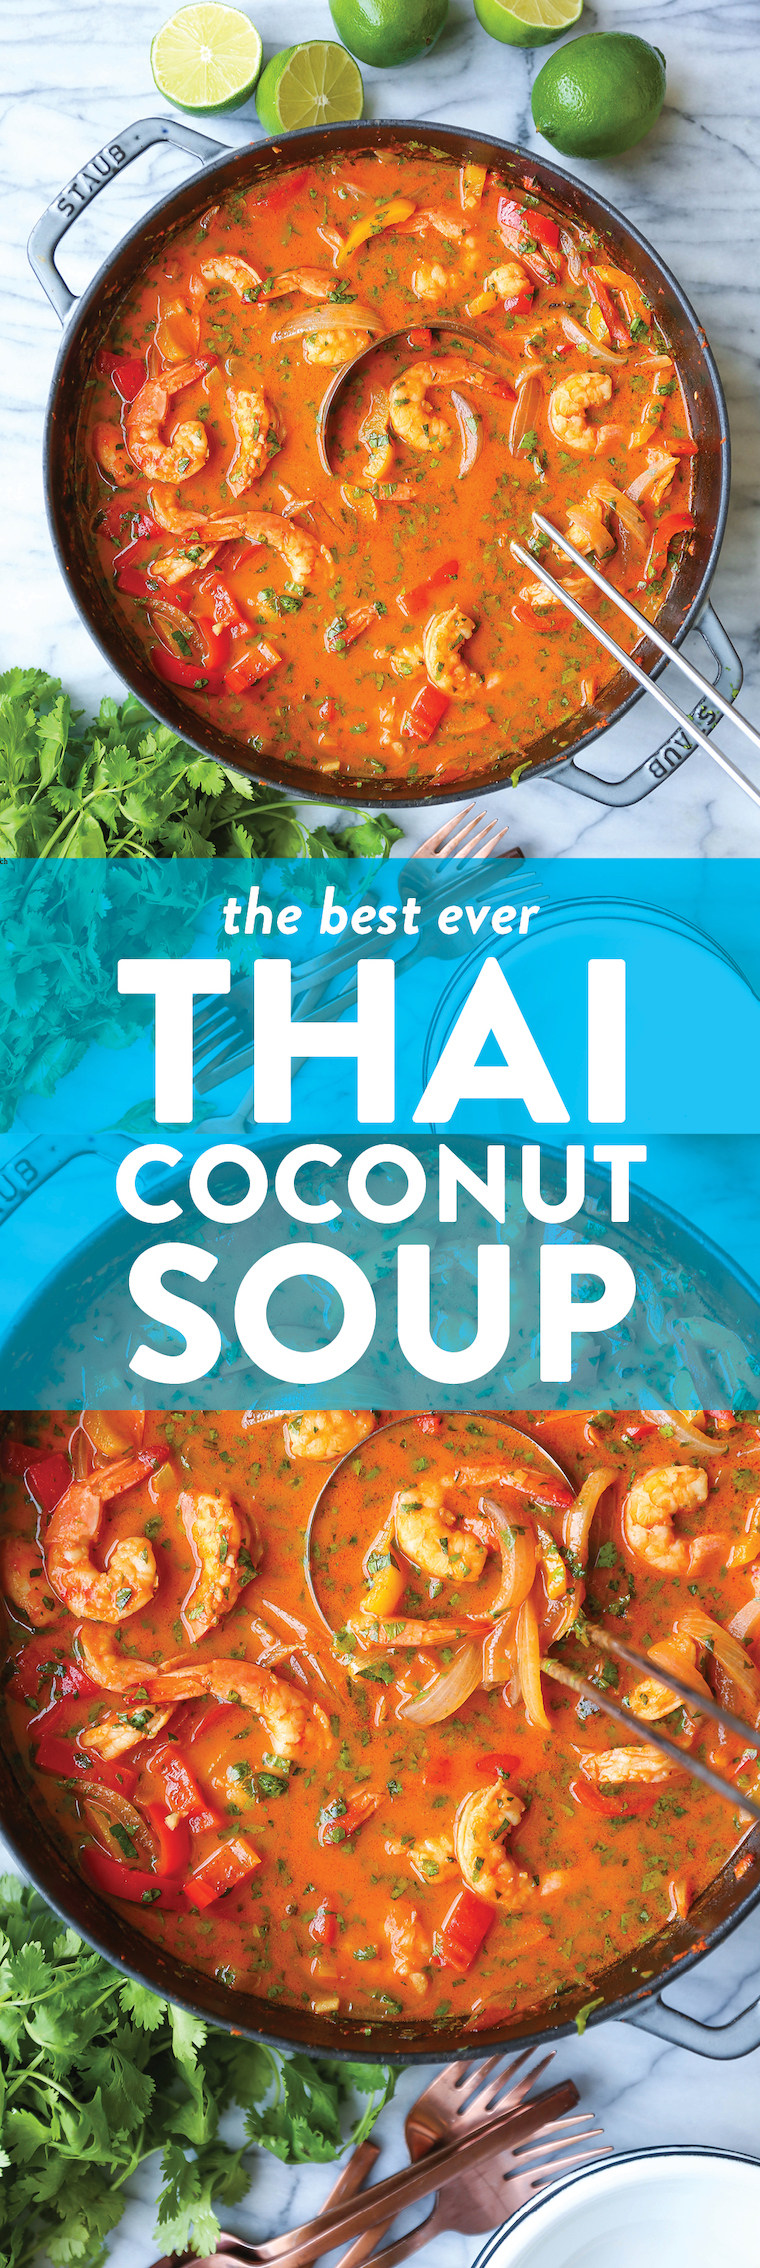 Thai Coconut Curry Soup - Skip the takeout! This will be your go-to Thai curry soup! Serve with fresh Thai basil, cilantro and lime juice. So cozy, so good.